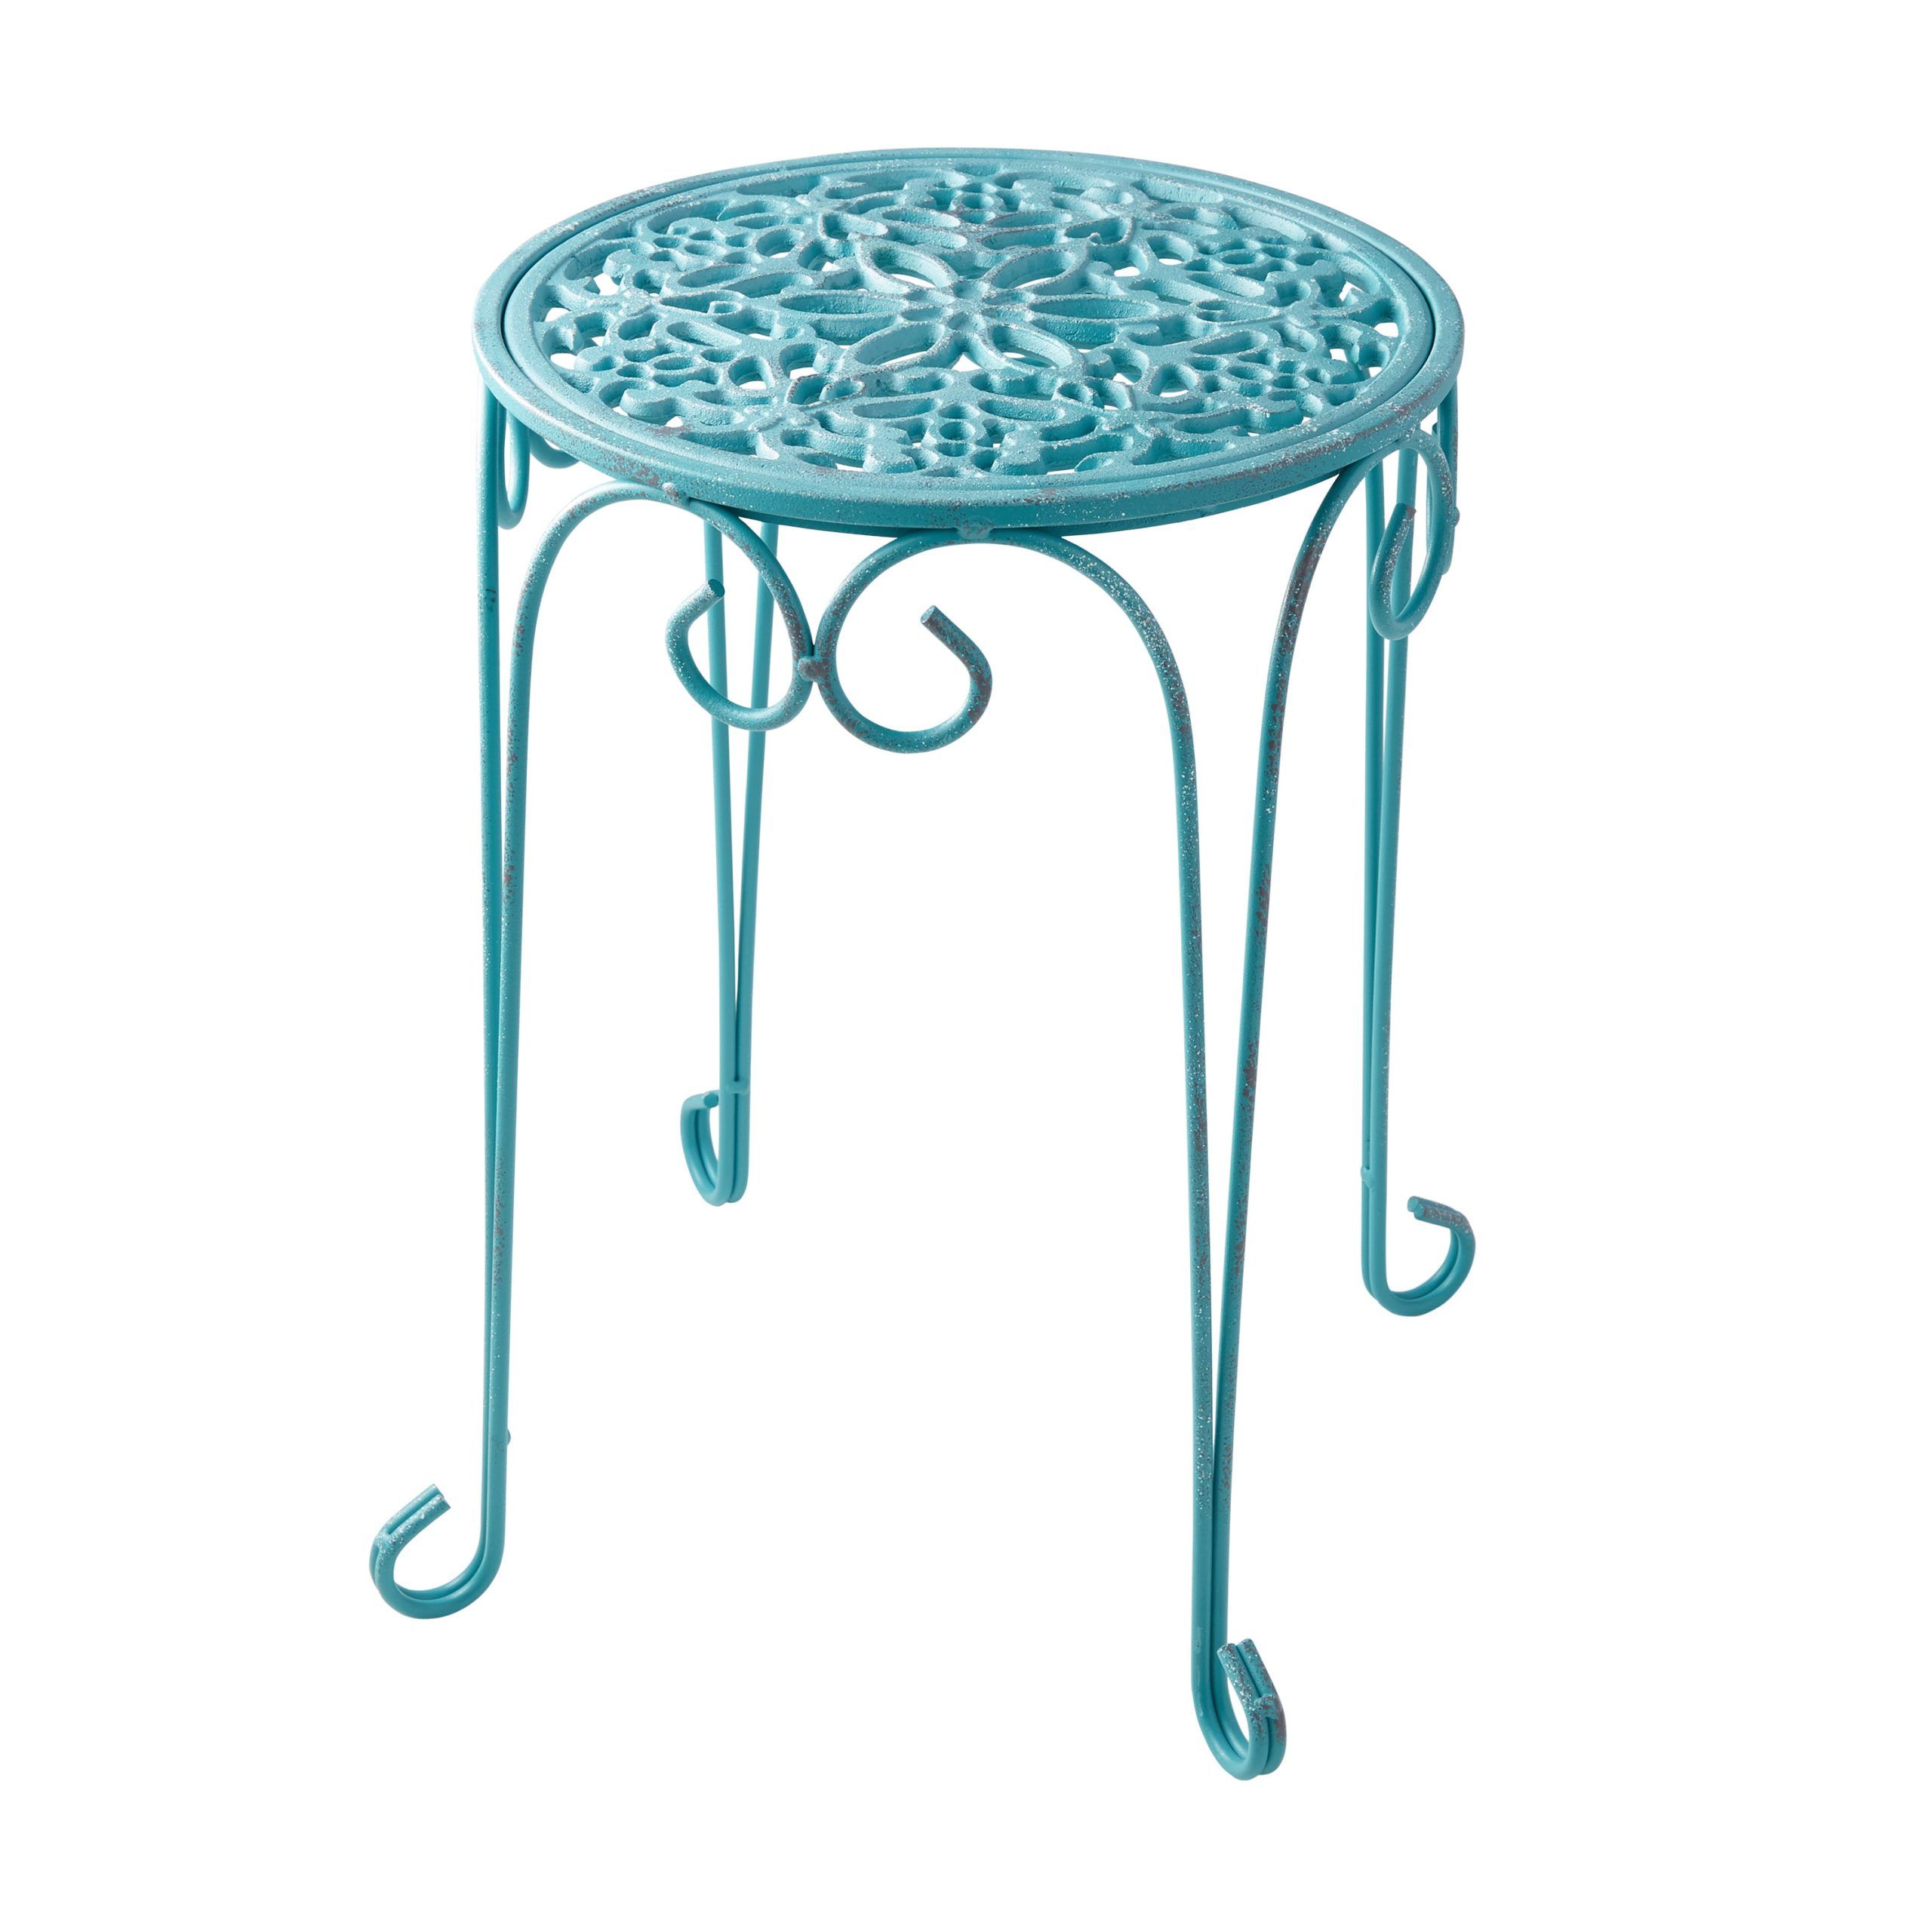 The Pioneer Woman 16" Cast Iron Plant Stand Teal Color With Distressed  Finish – Walmart Intended For 16 Inch Plant Stands (View 6 of 15)